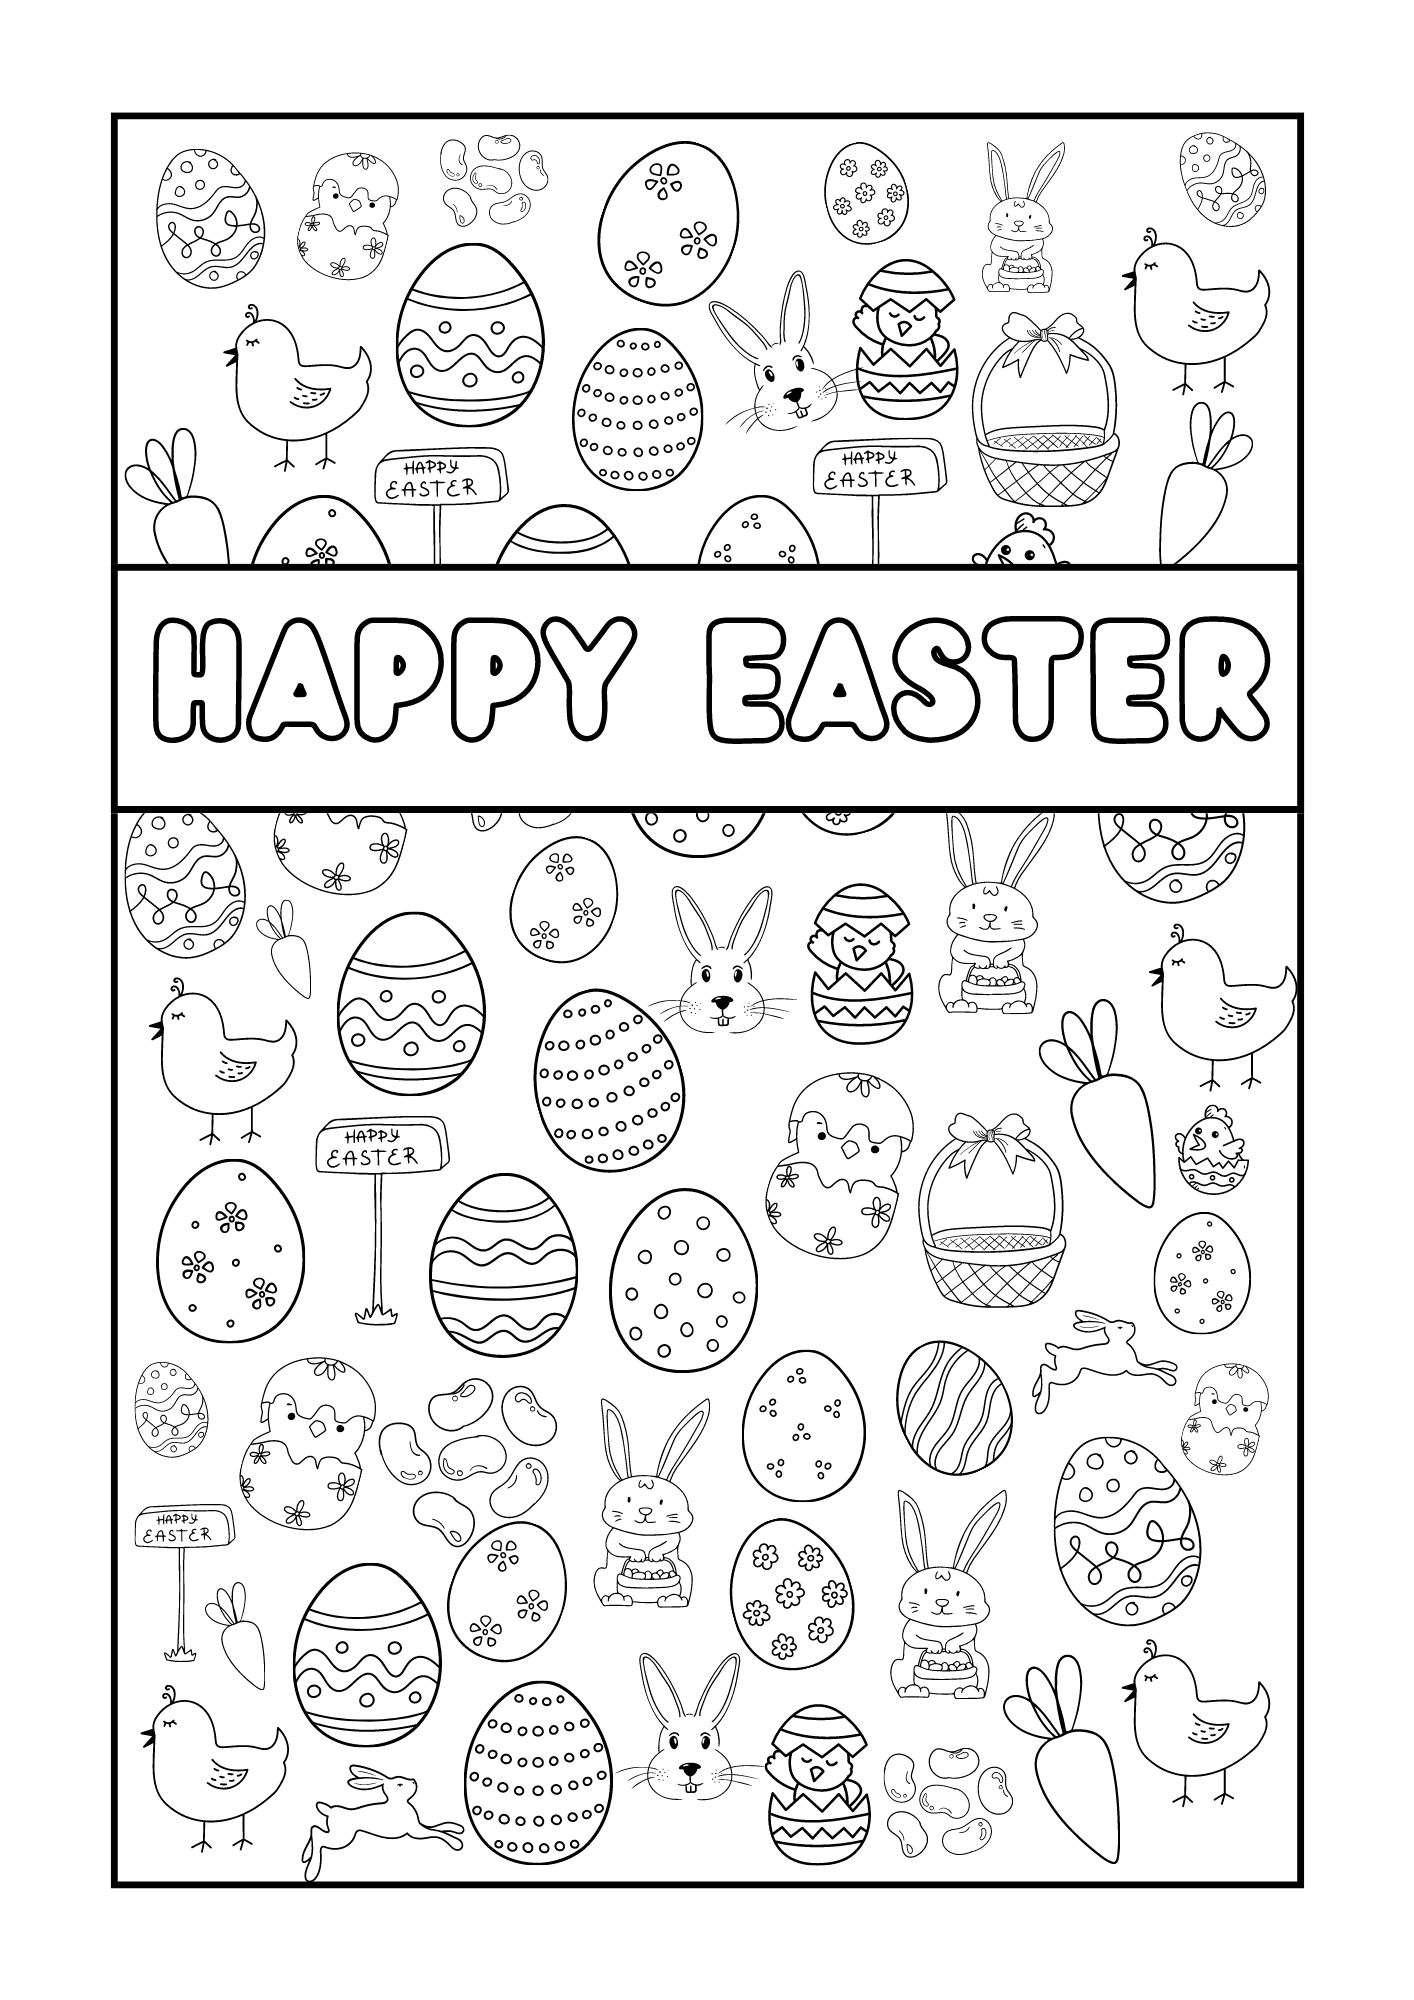 Black and White Doodle Happy Easter Coloring Page Worksheet